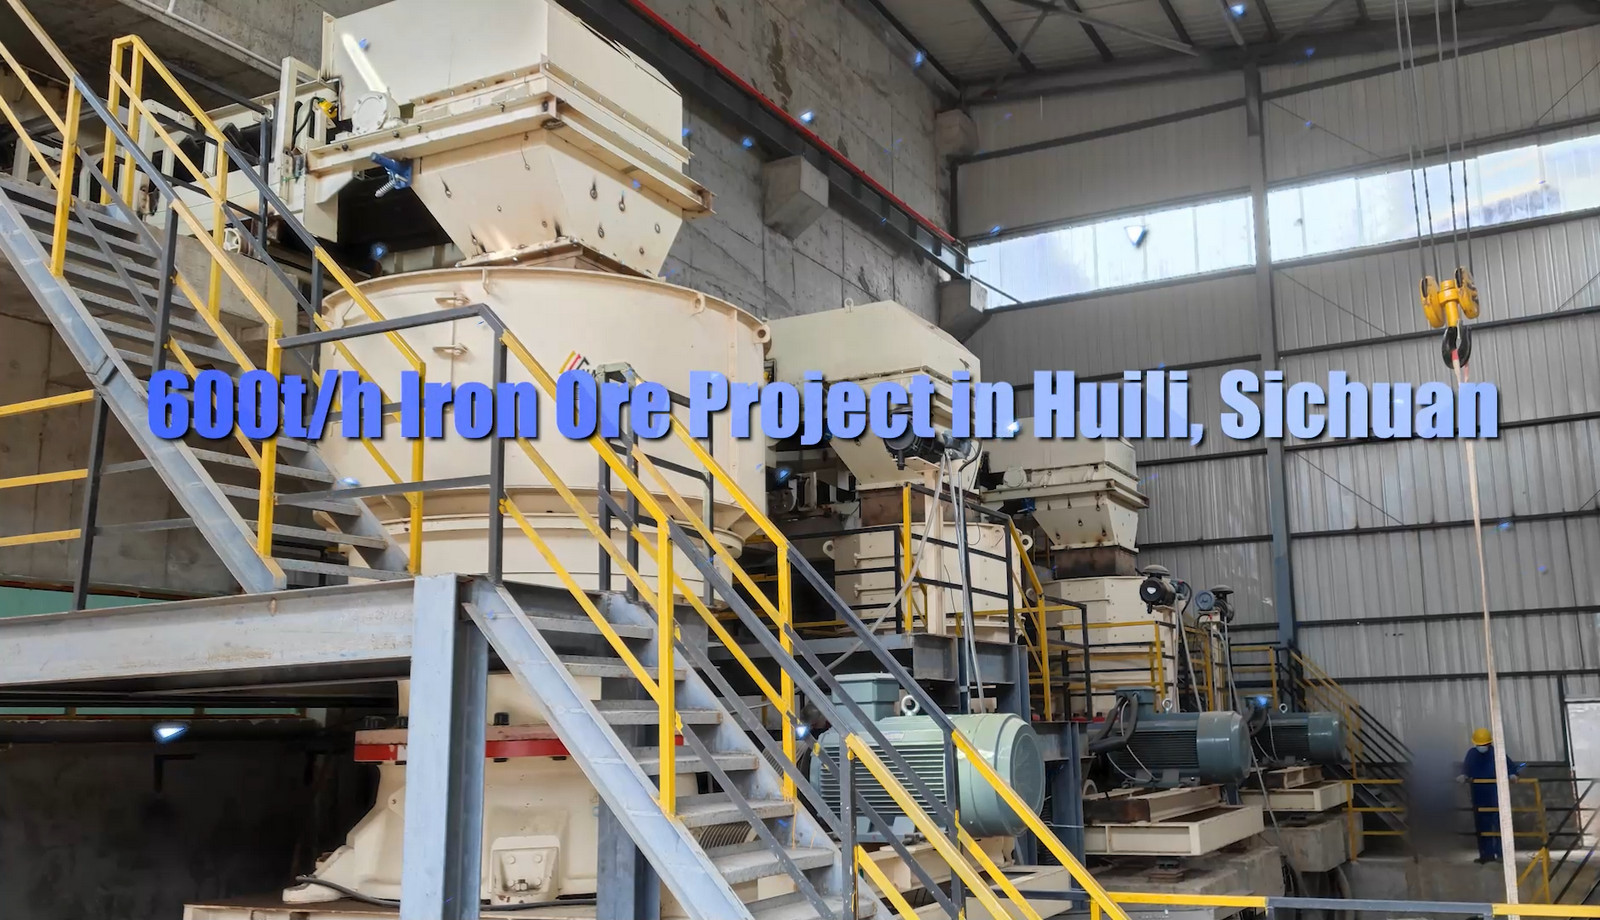 600t/h Iron Ore Project in Huili, Sichuan